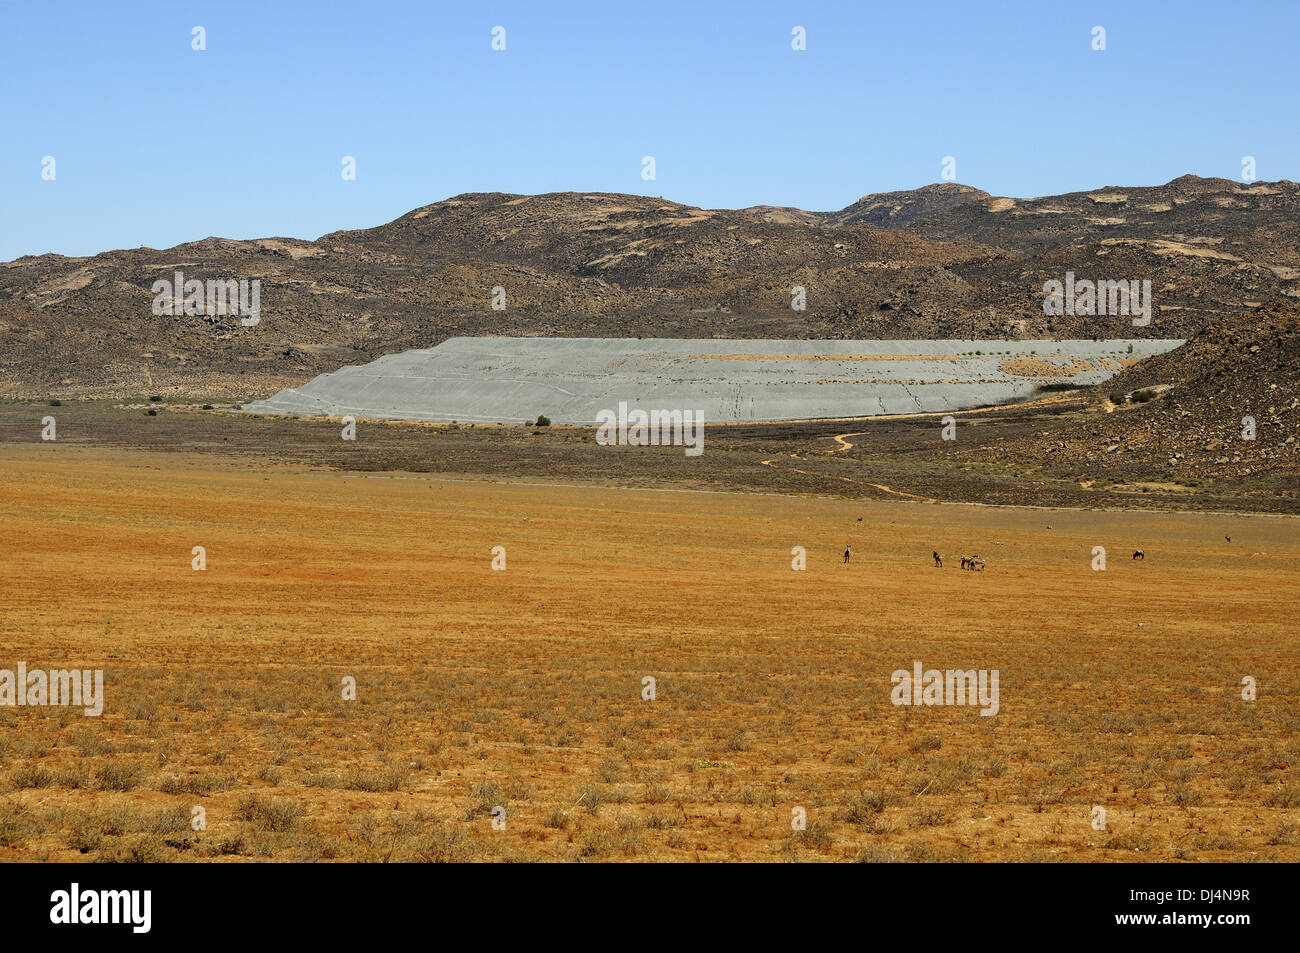 Dam of the stockpile of a closed coppermine Stock Photo